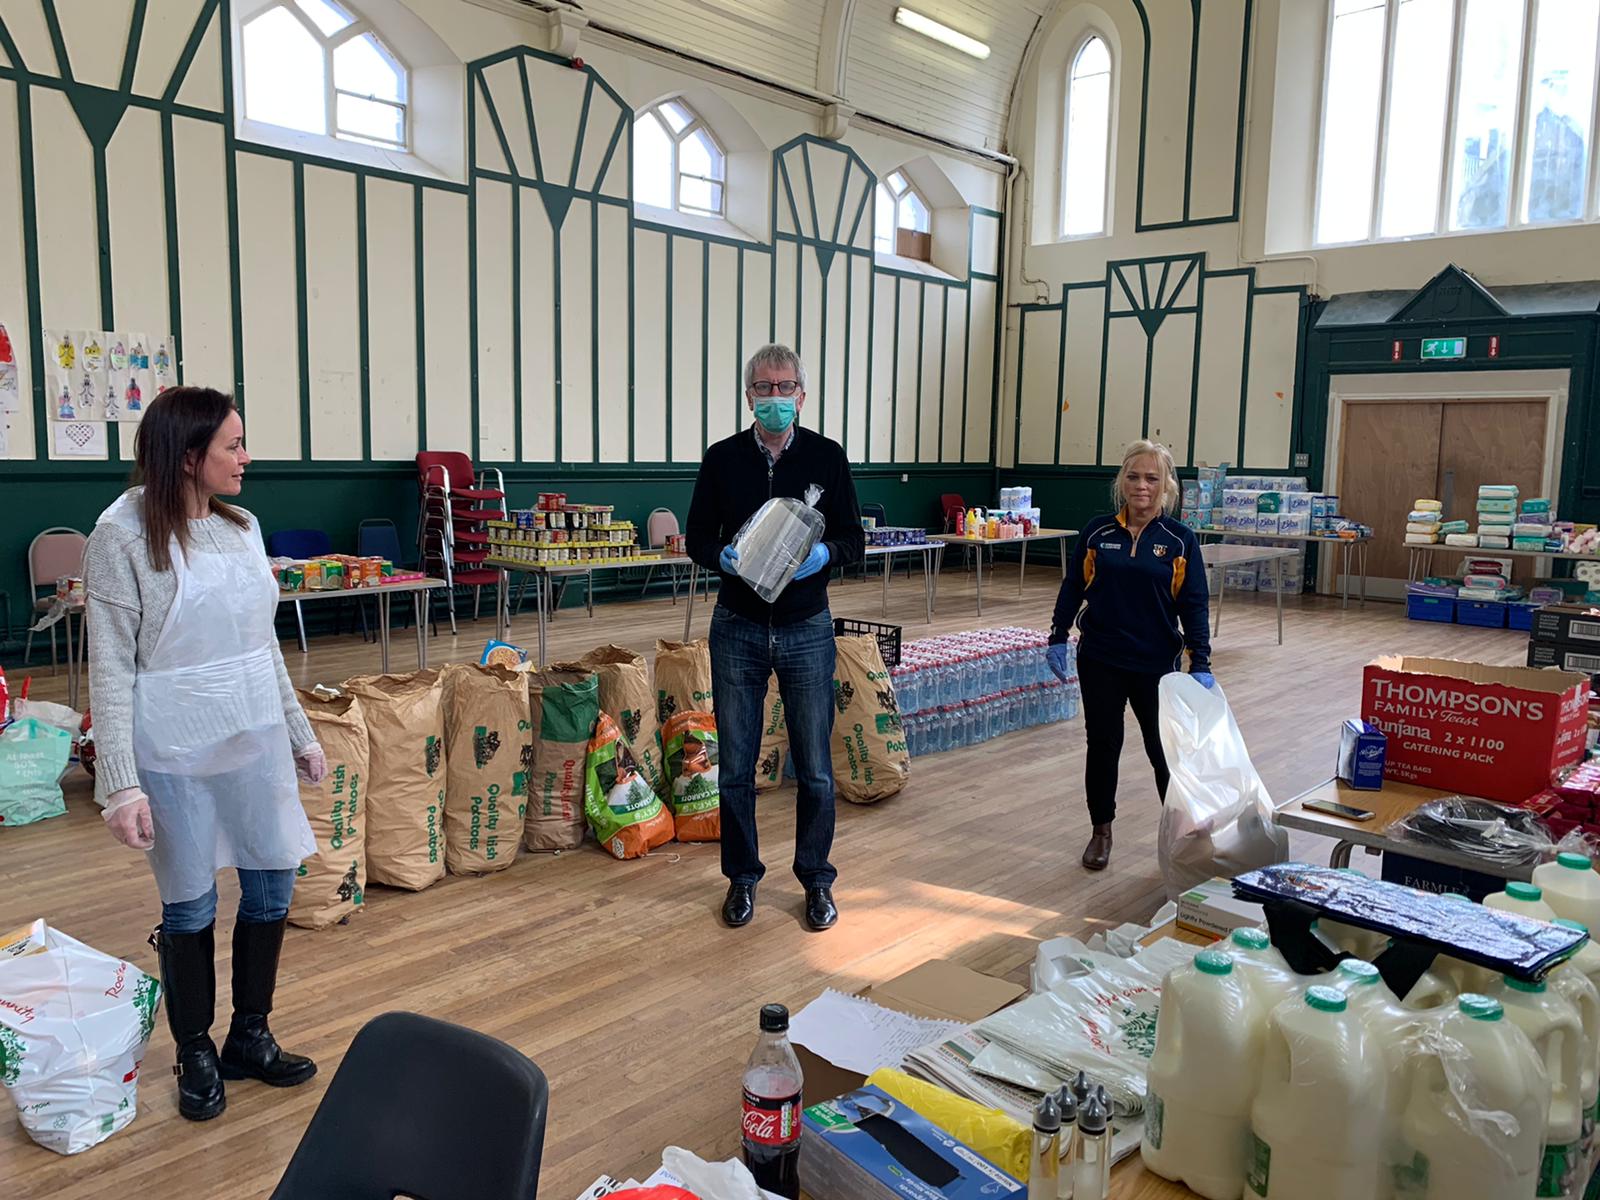 FOOD BANK ON FRONTLINE: Delivering PPE face shields to the volunteers at the North Belfast Food Bank today